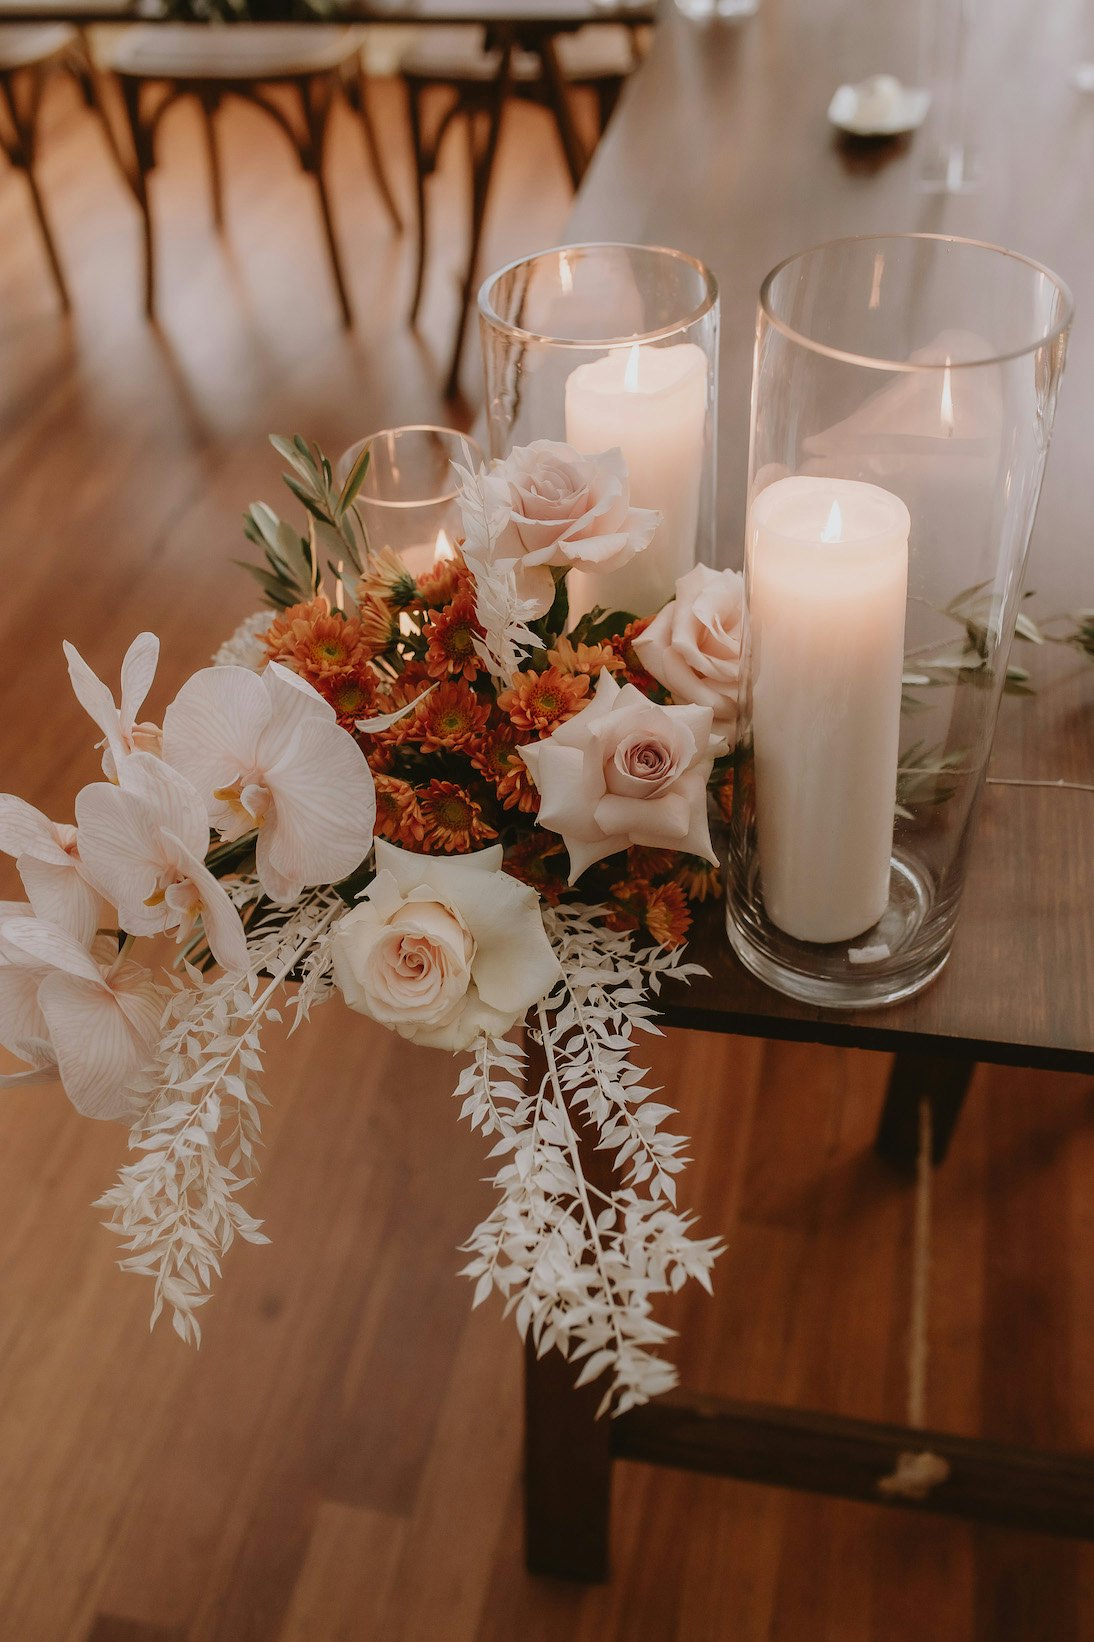 Wedding vases and flowers on tables 